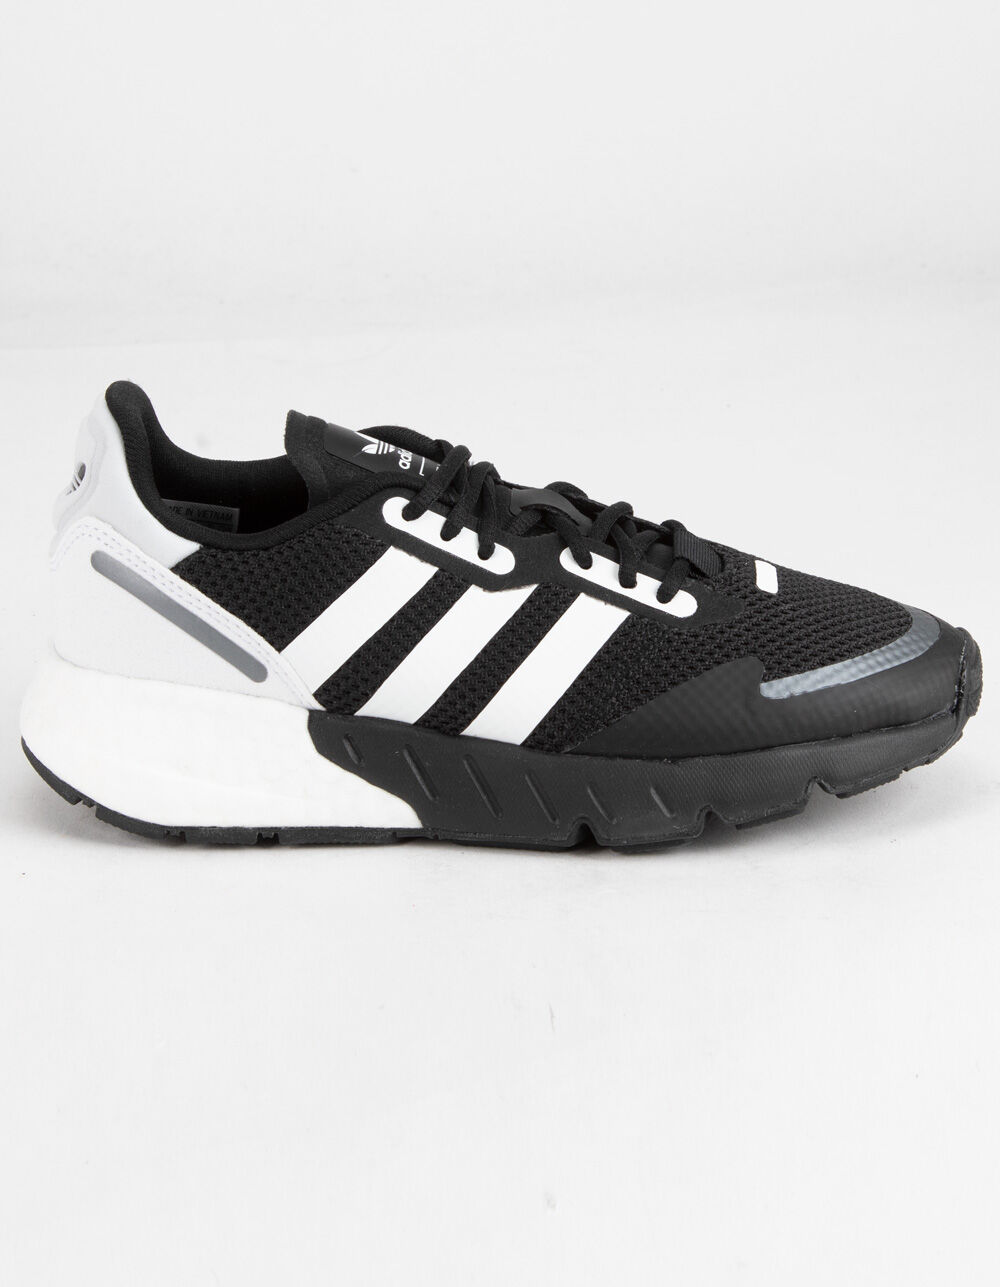 ADIDAS ZX 1K Boost Boys Shoes - BLACK/WHITE | Tillys